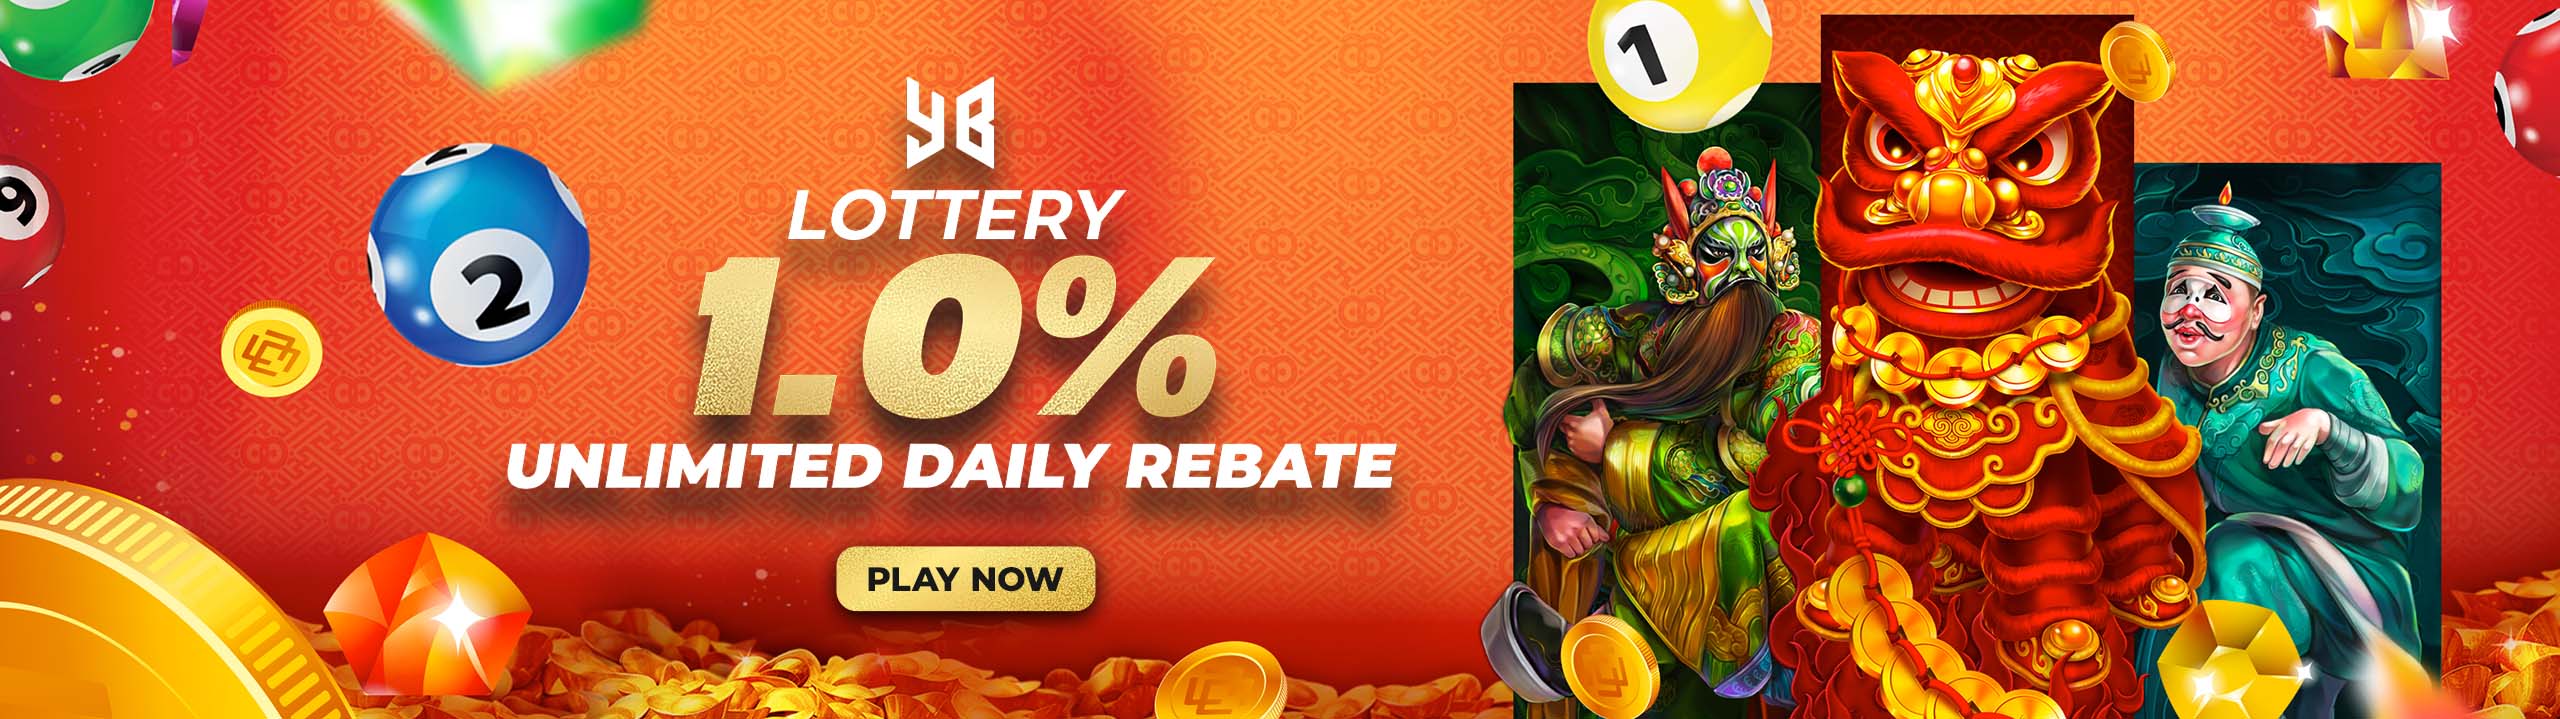 Lottery 1% Unlimited Daily Rebate